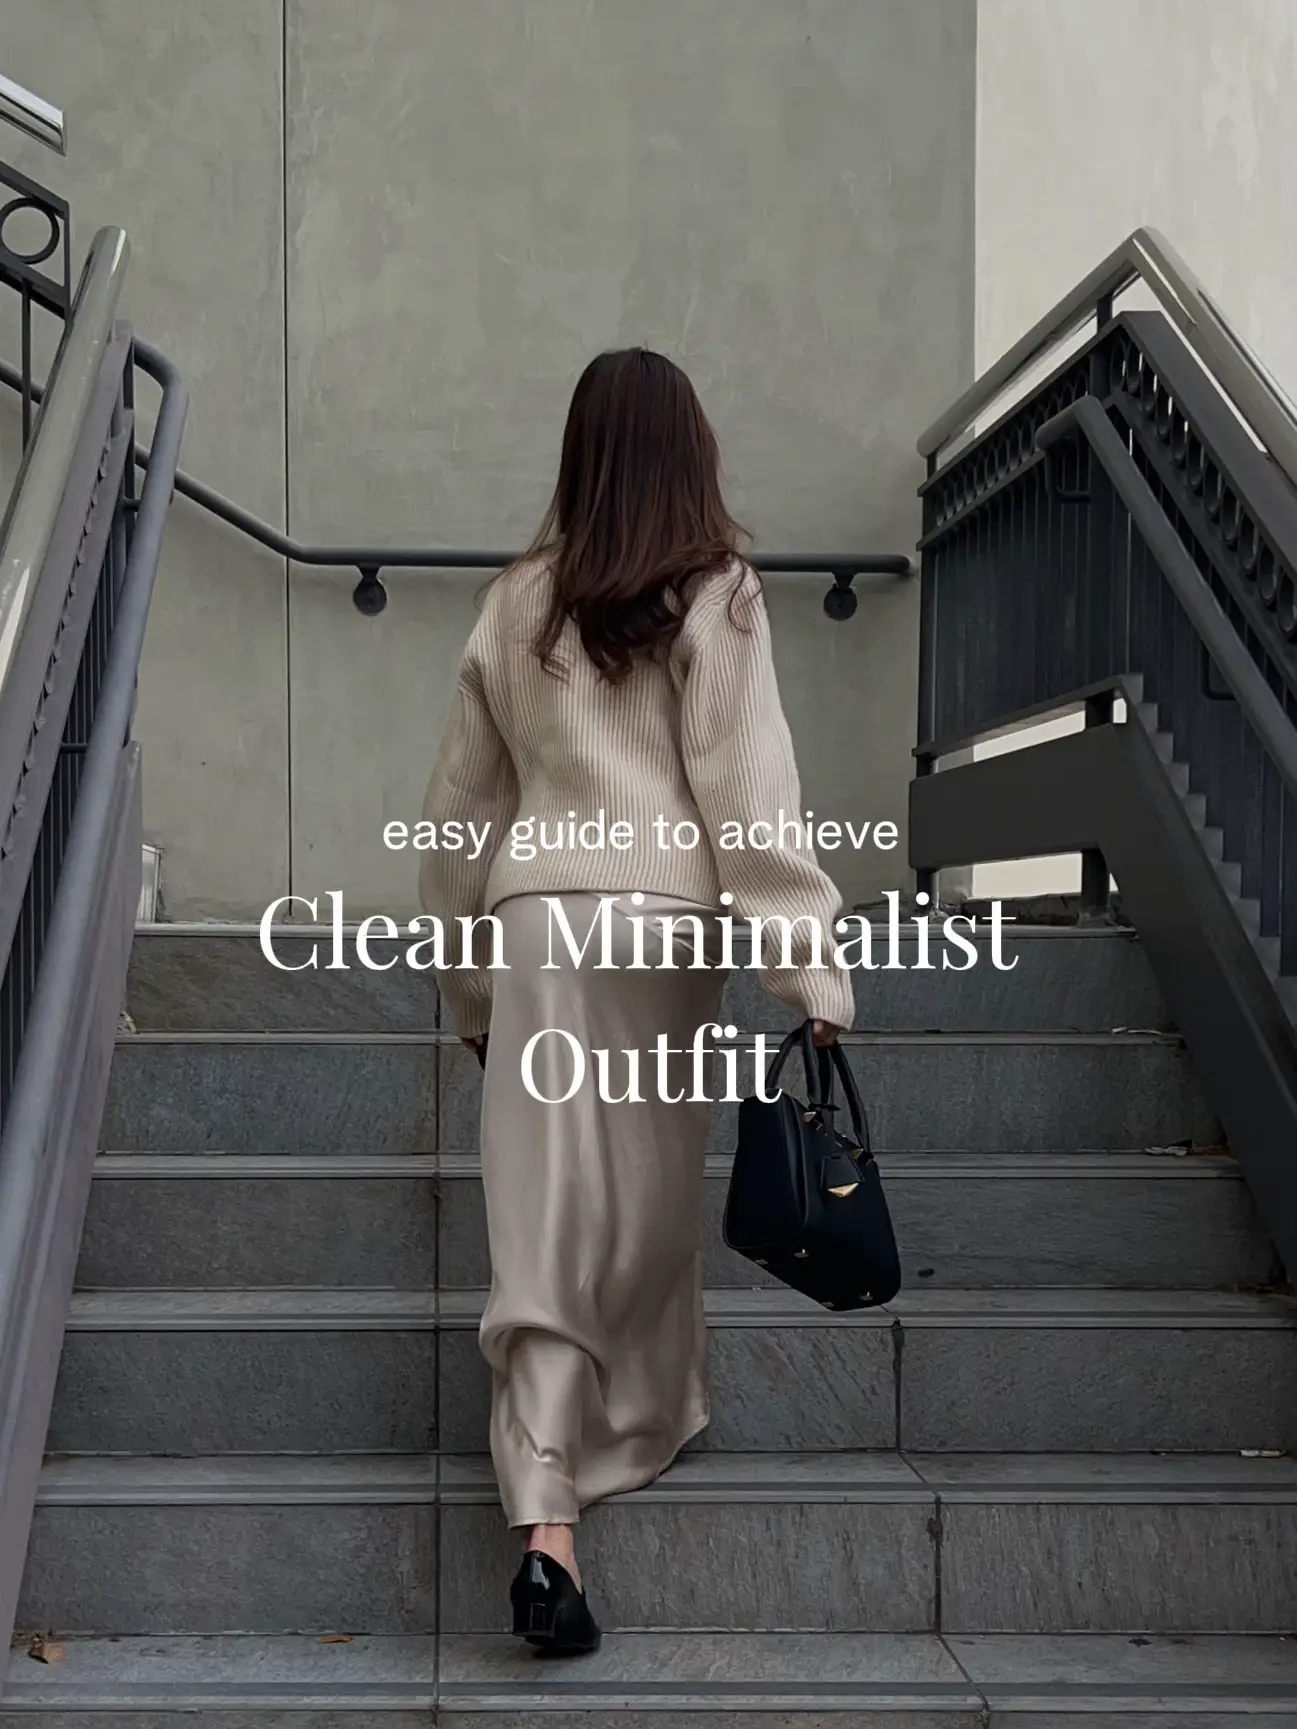 EASY GUIDE TO ACHIEVE CLEAN MINIMALIST OUTFIT's images